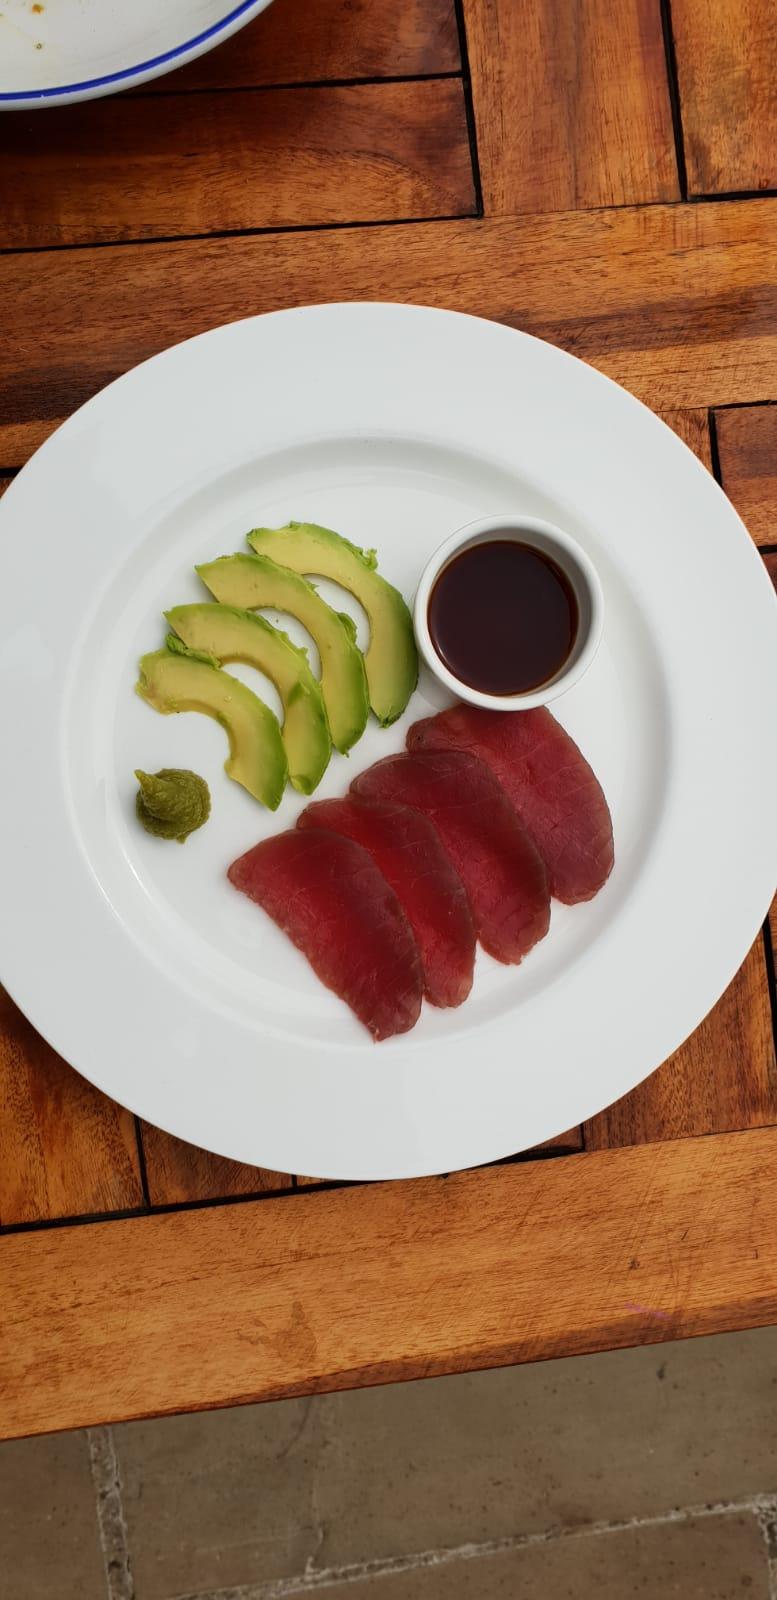 Yellowfin tuna sashimi We have gone on about swaps a lot and it really is working. It reduces food miles and wastage and brings us really fresh local produce.